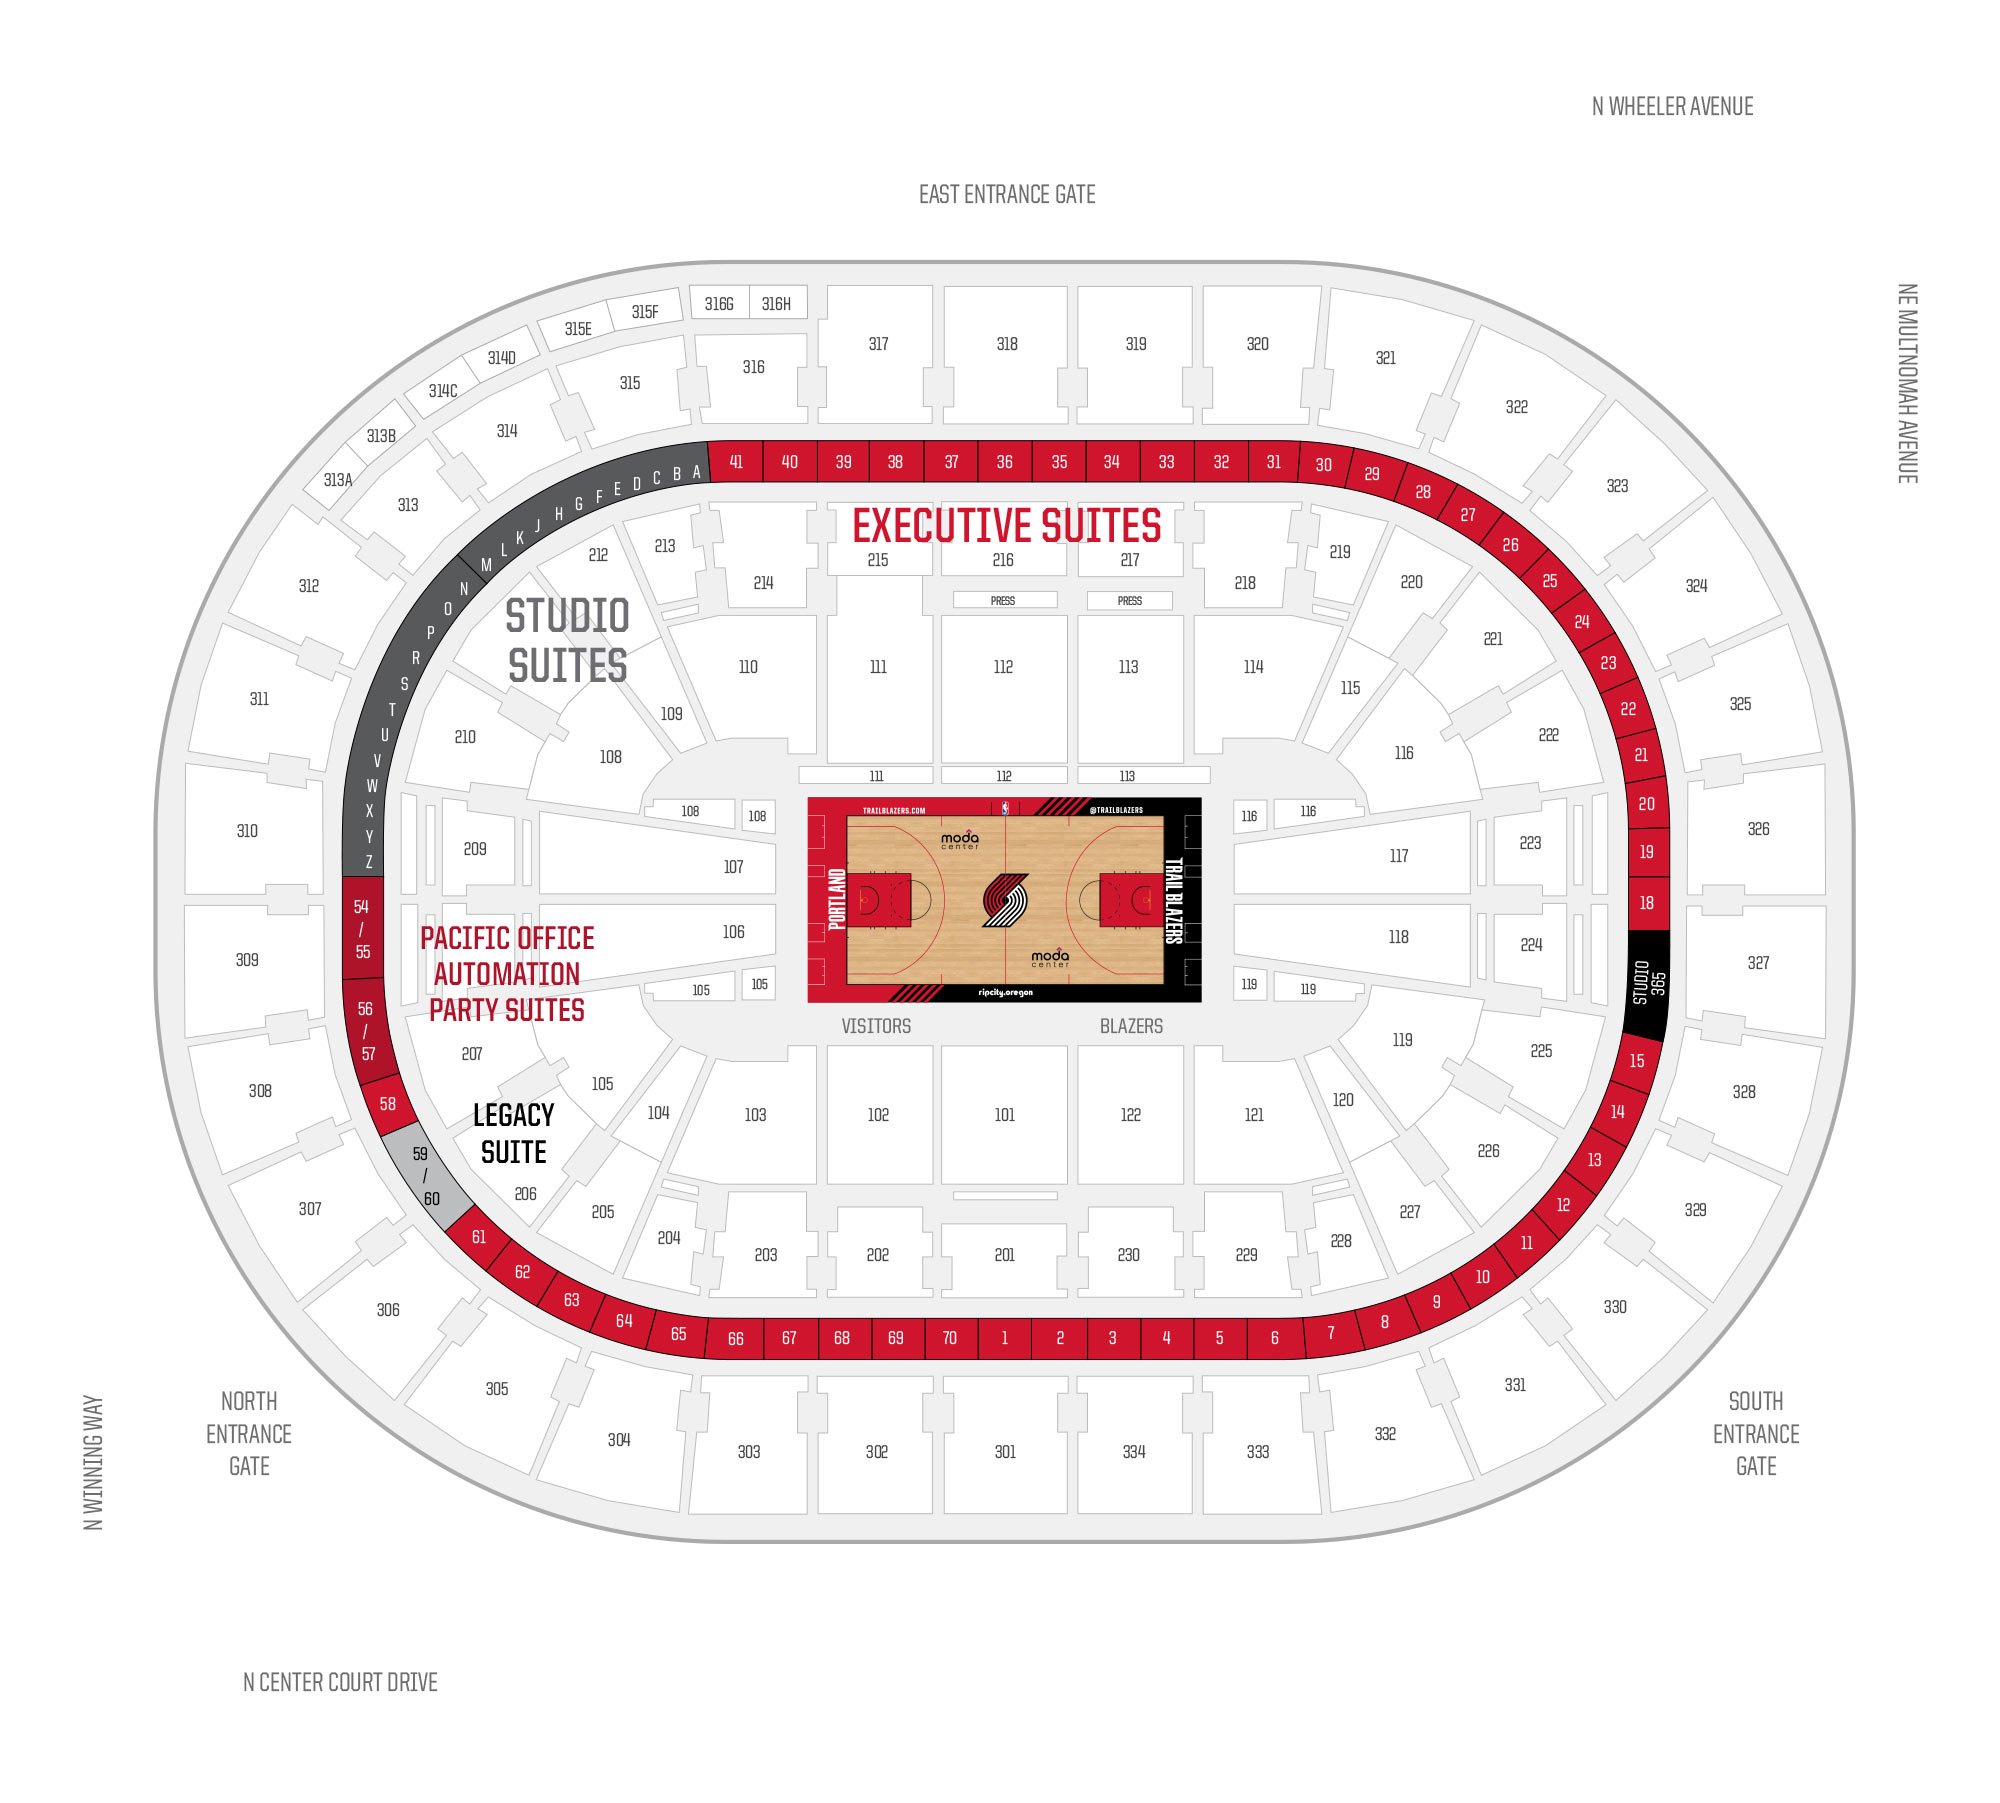 Moda Center / Portland Trail Blazers Suite Map and Seating Chart